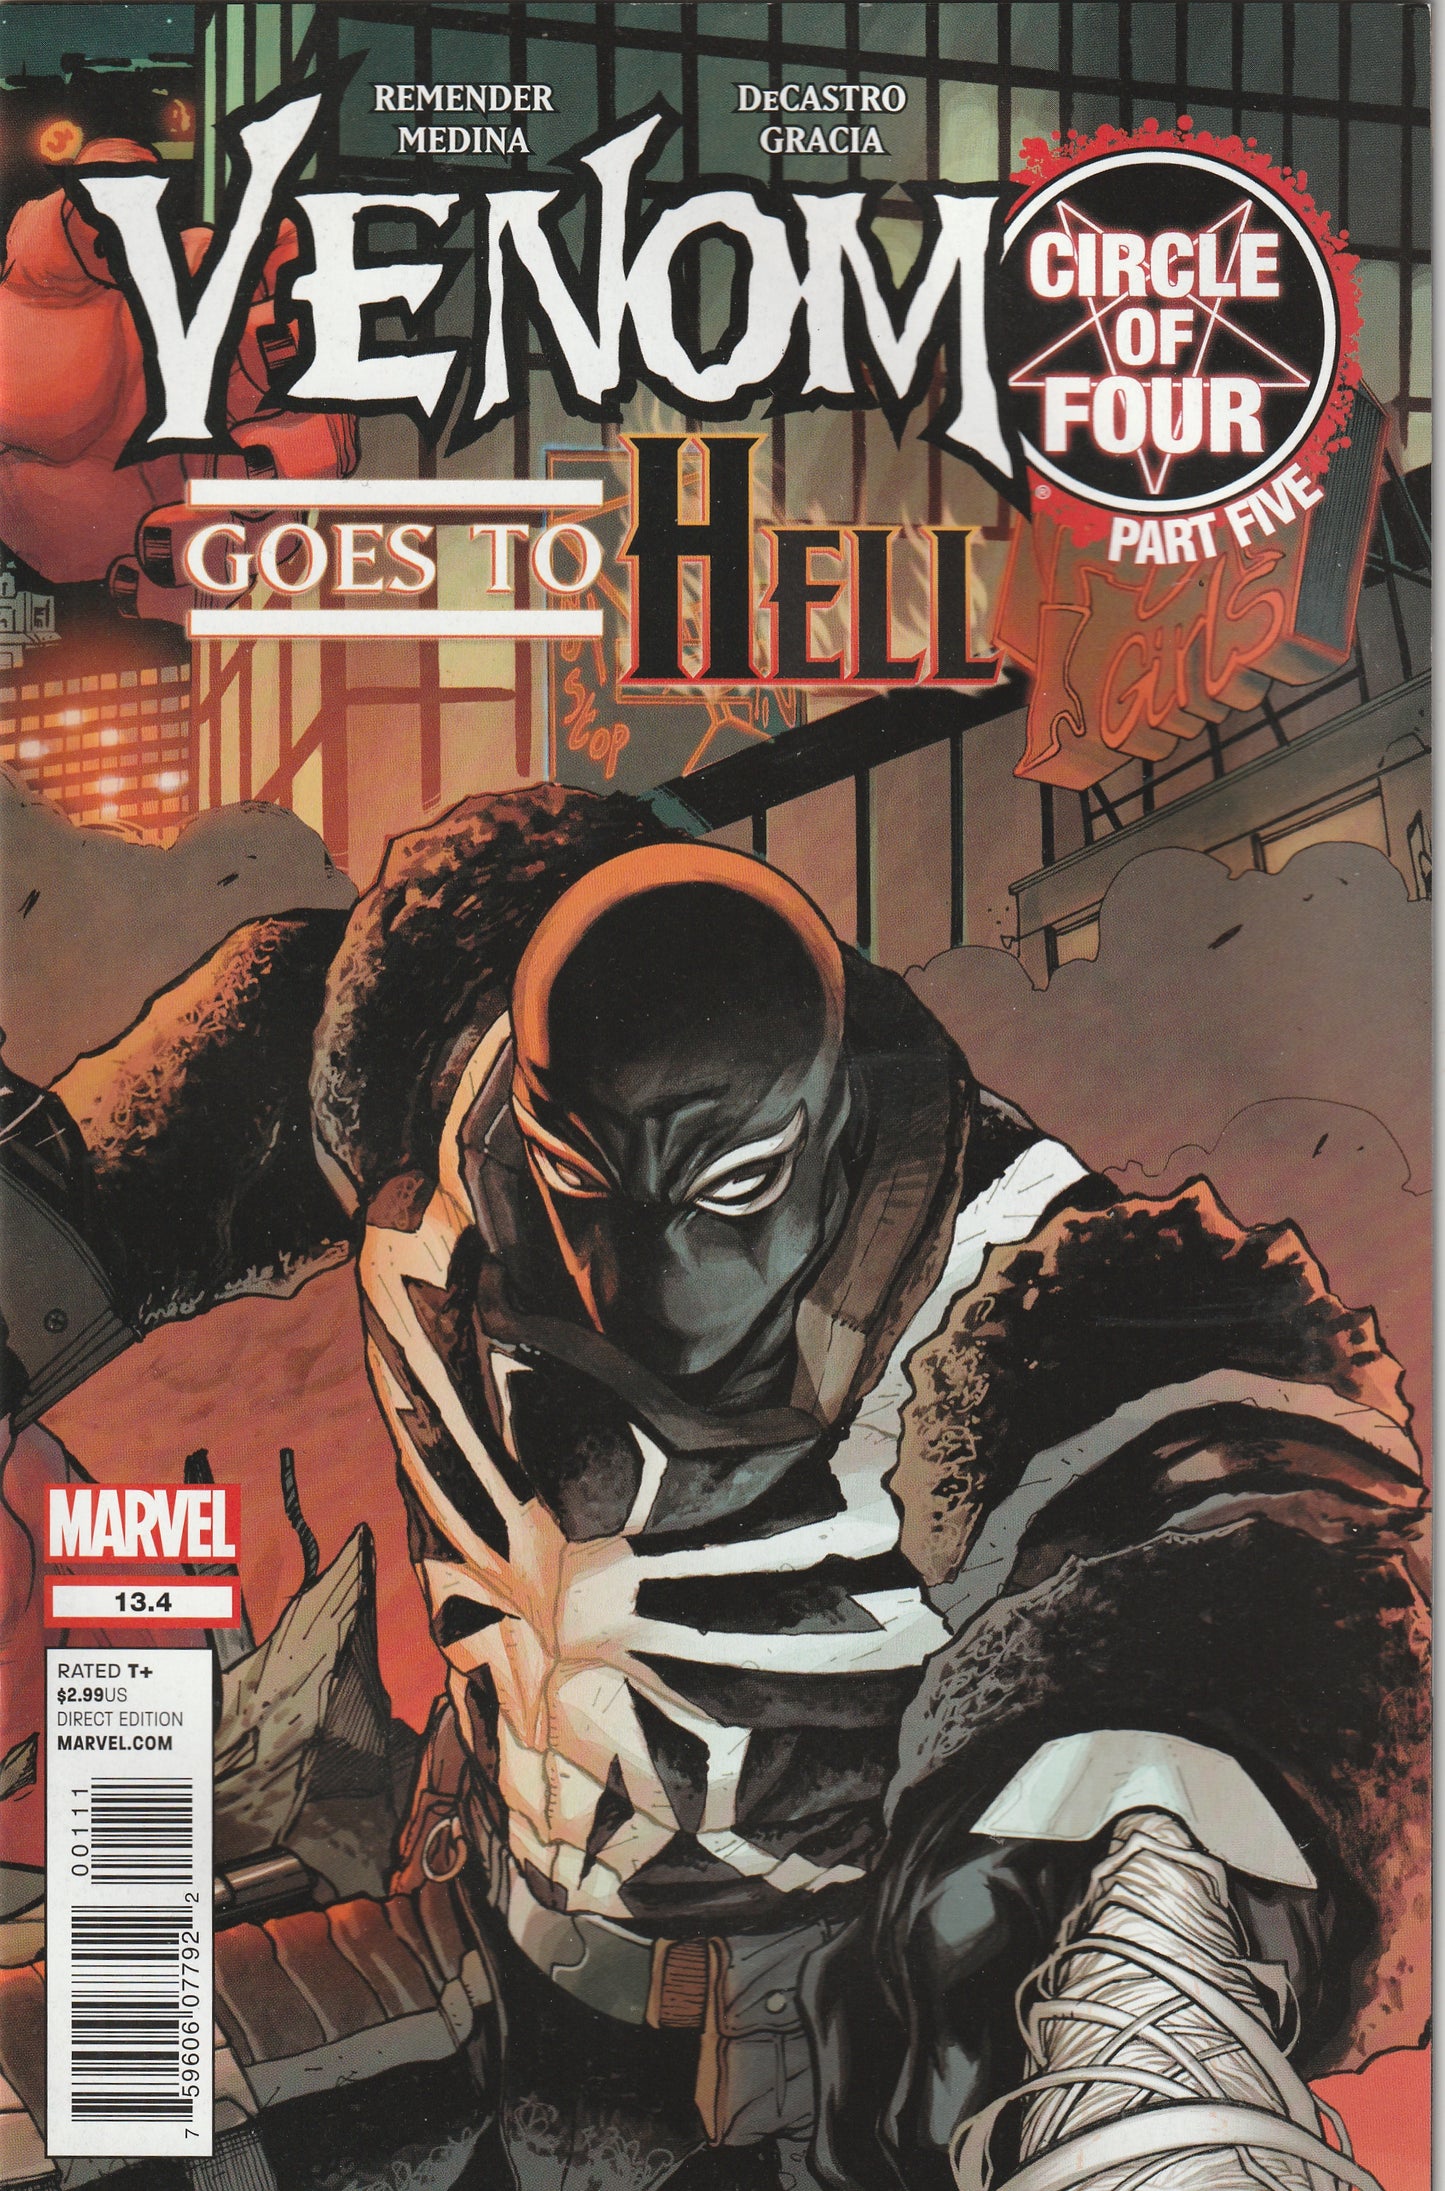 Venom #13.4 (2012) - Circle of Four Part 5 - 1st appearance of Thunderbolt Ross as Circle of Four